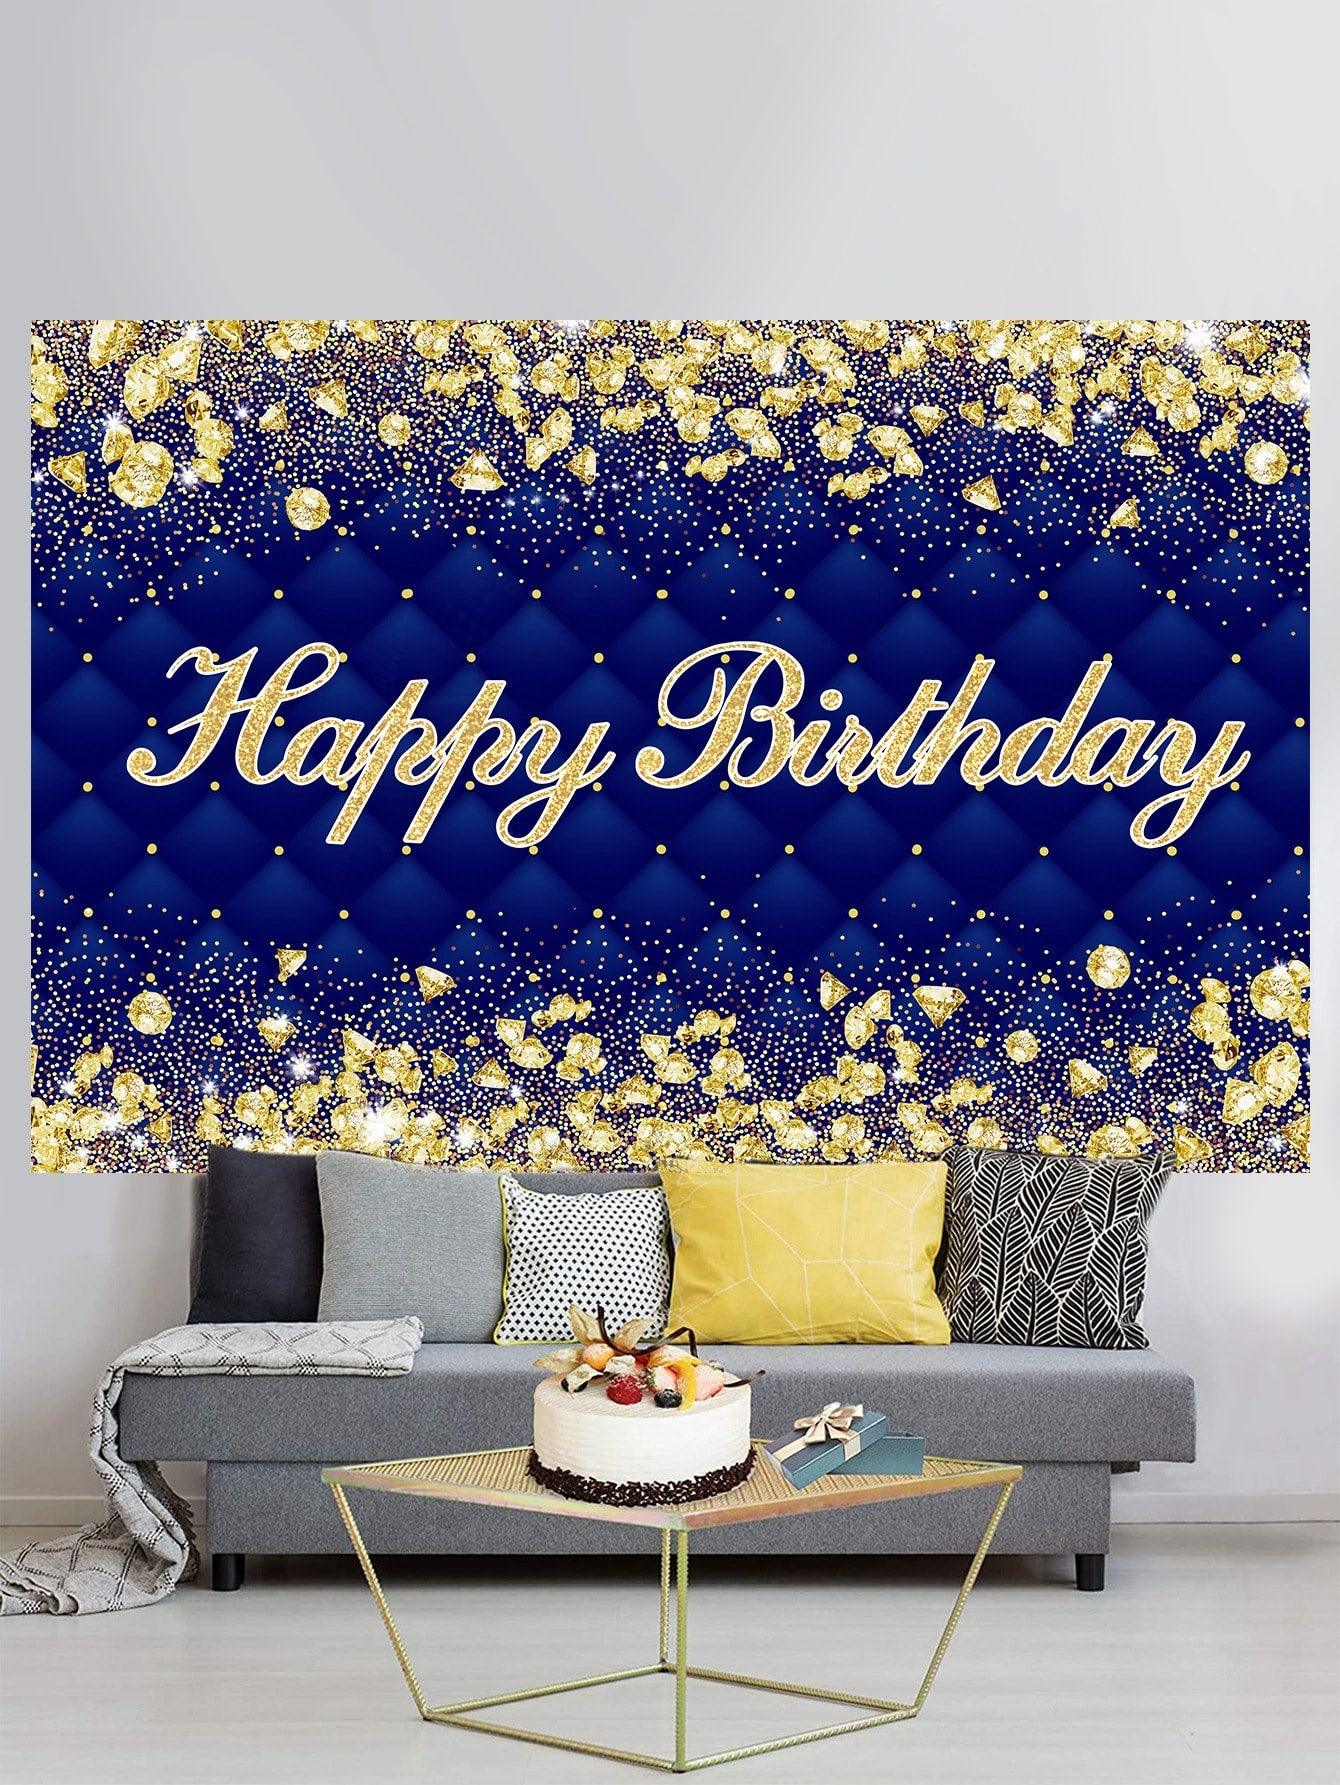 1pc Black Gold Metallic Birthday Party Banner - If you say i do